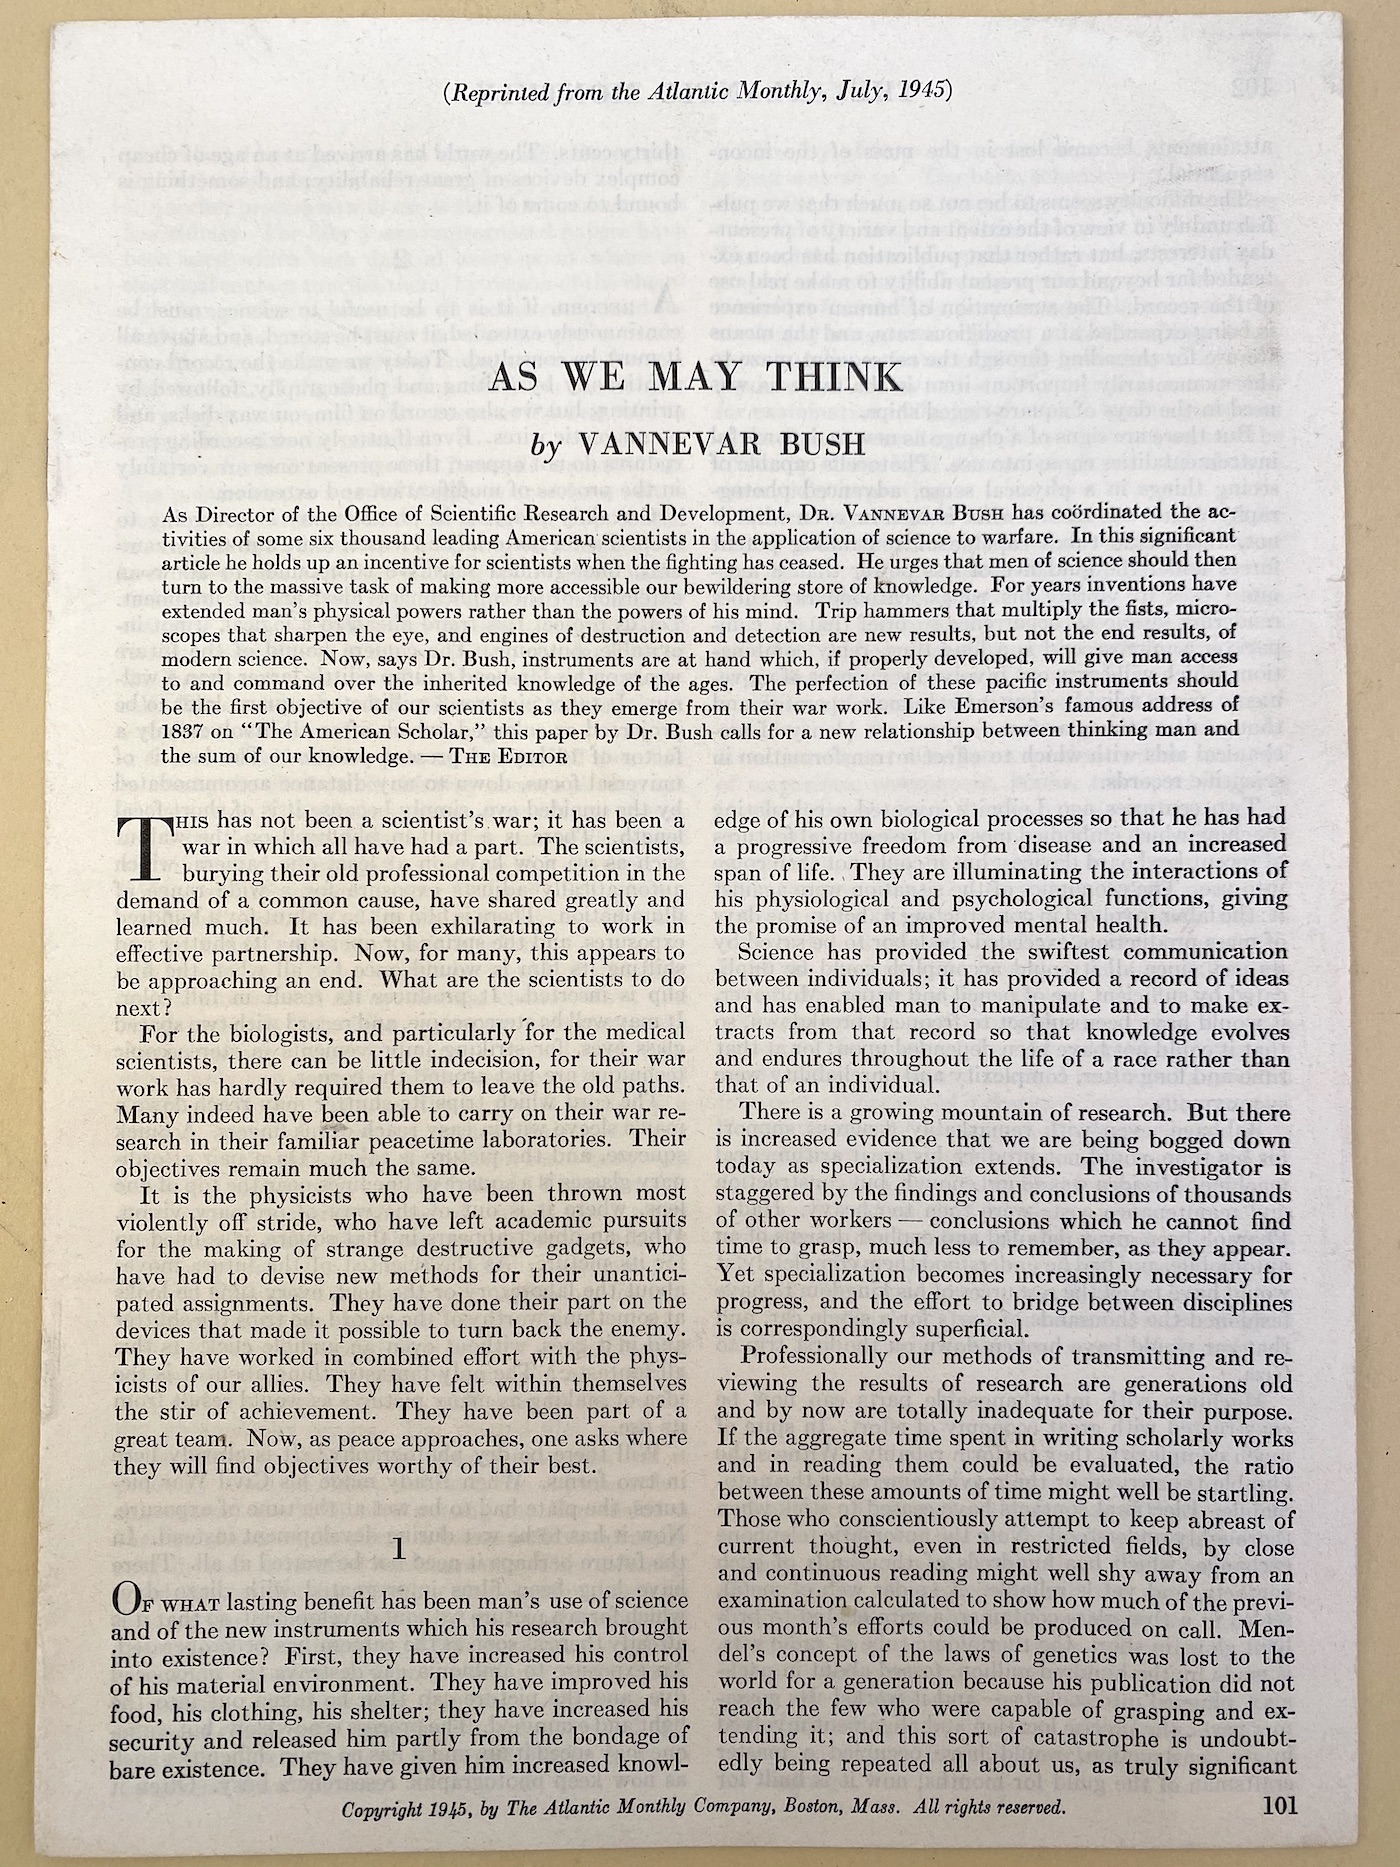 First page of the separate offprint of Bush's "As We May Think." This copy, in my private collection, is the only separate offprint of this paper of which I am aware.